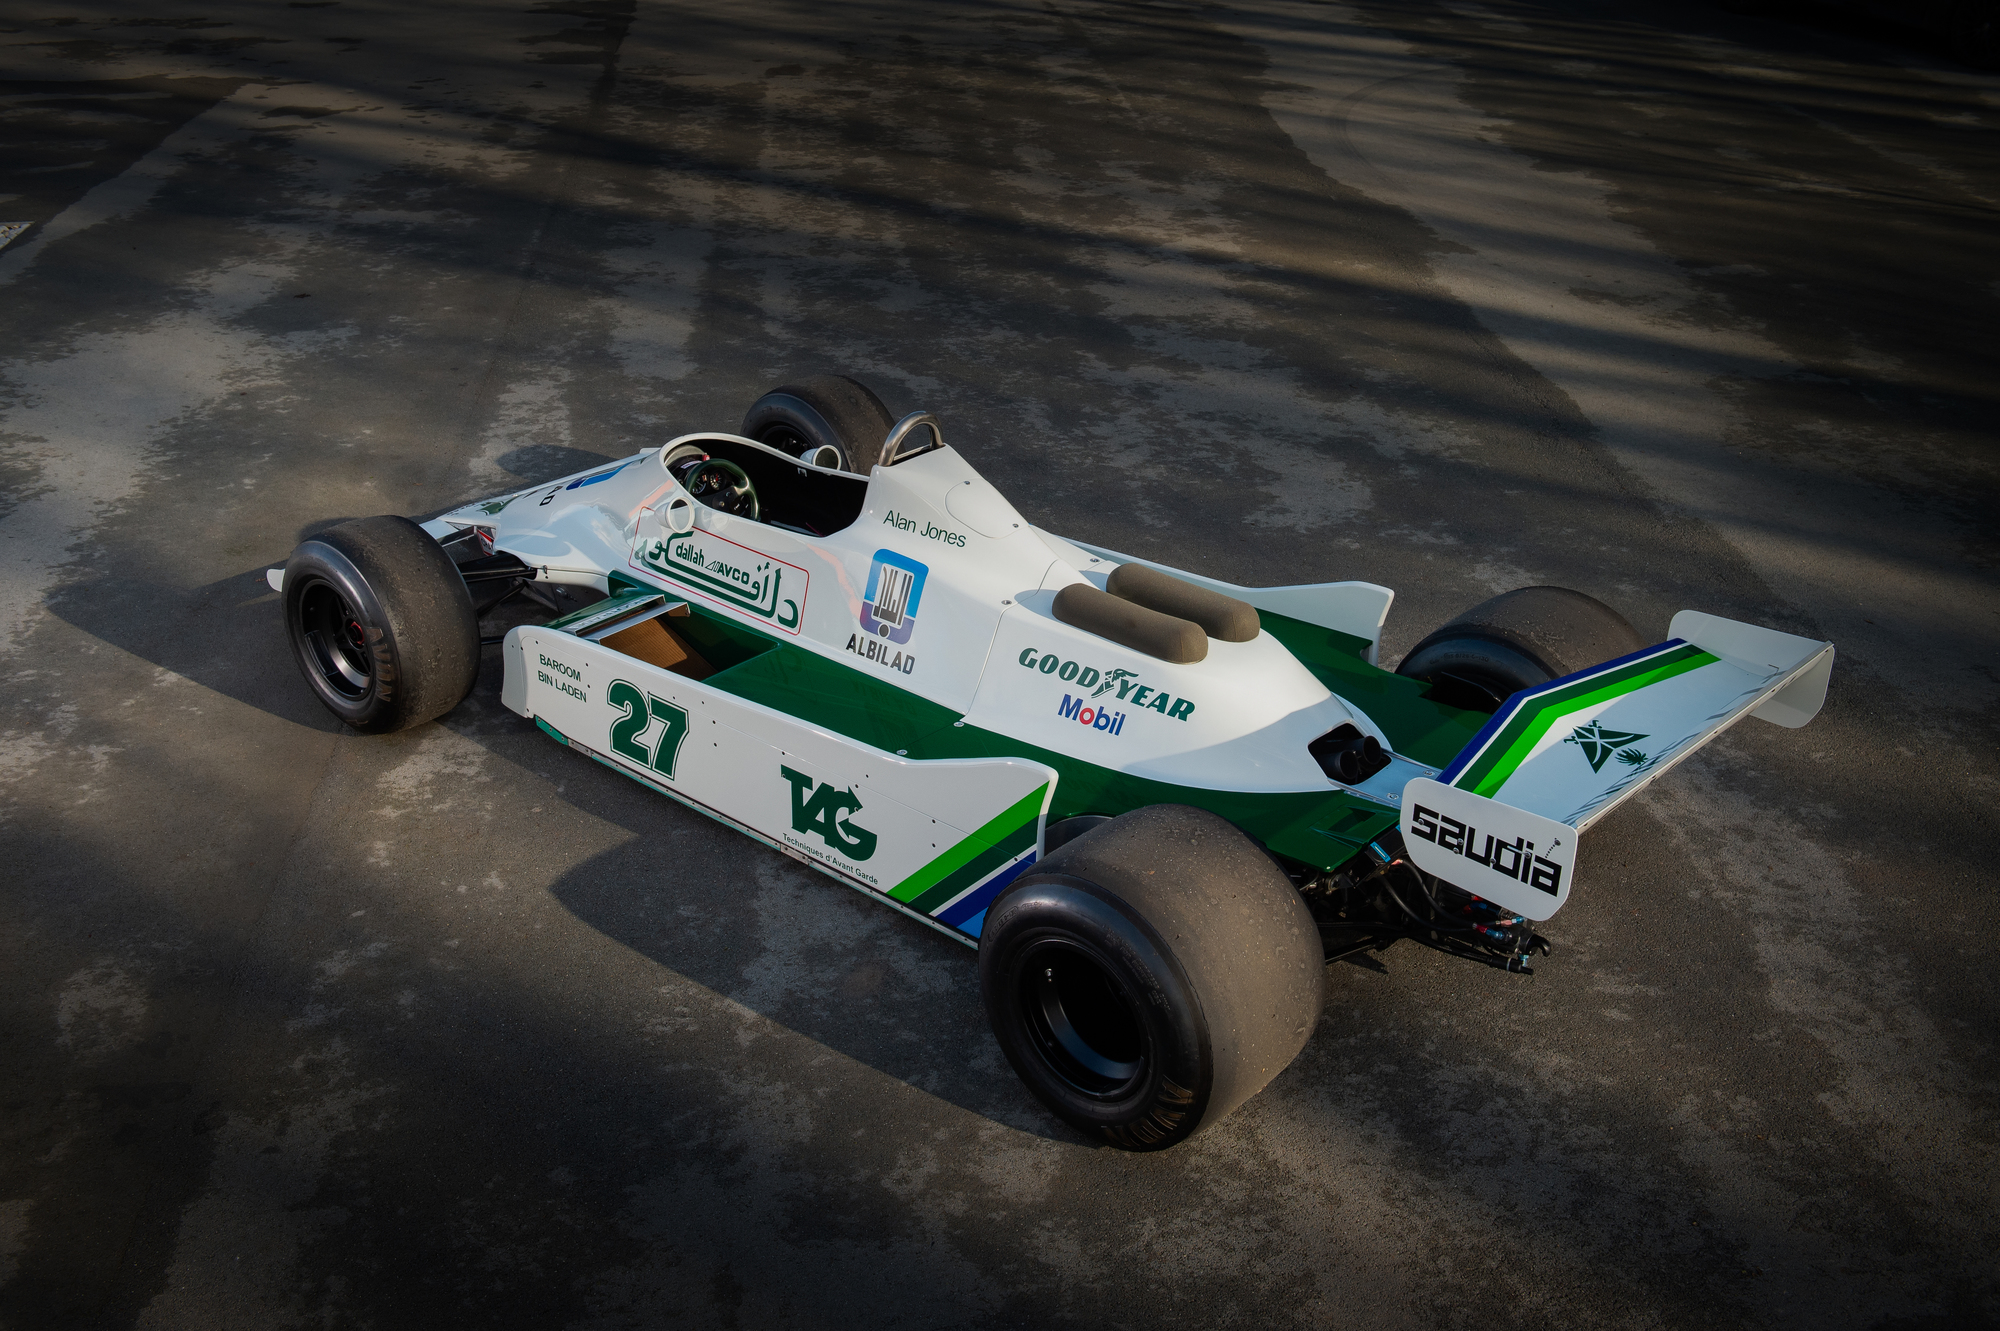 1979 Williams-Ford FW07 - chassis 01 - the first ever pole for